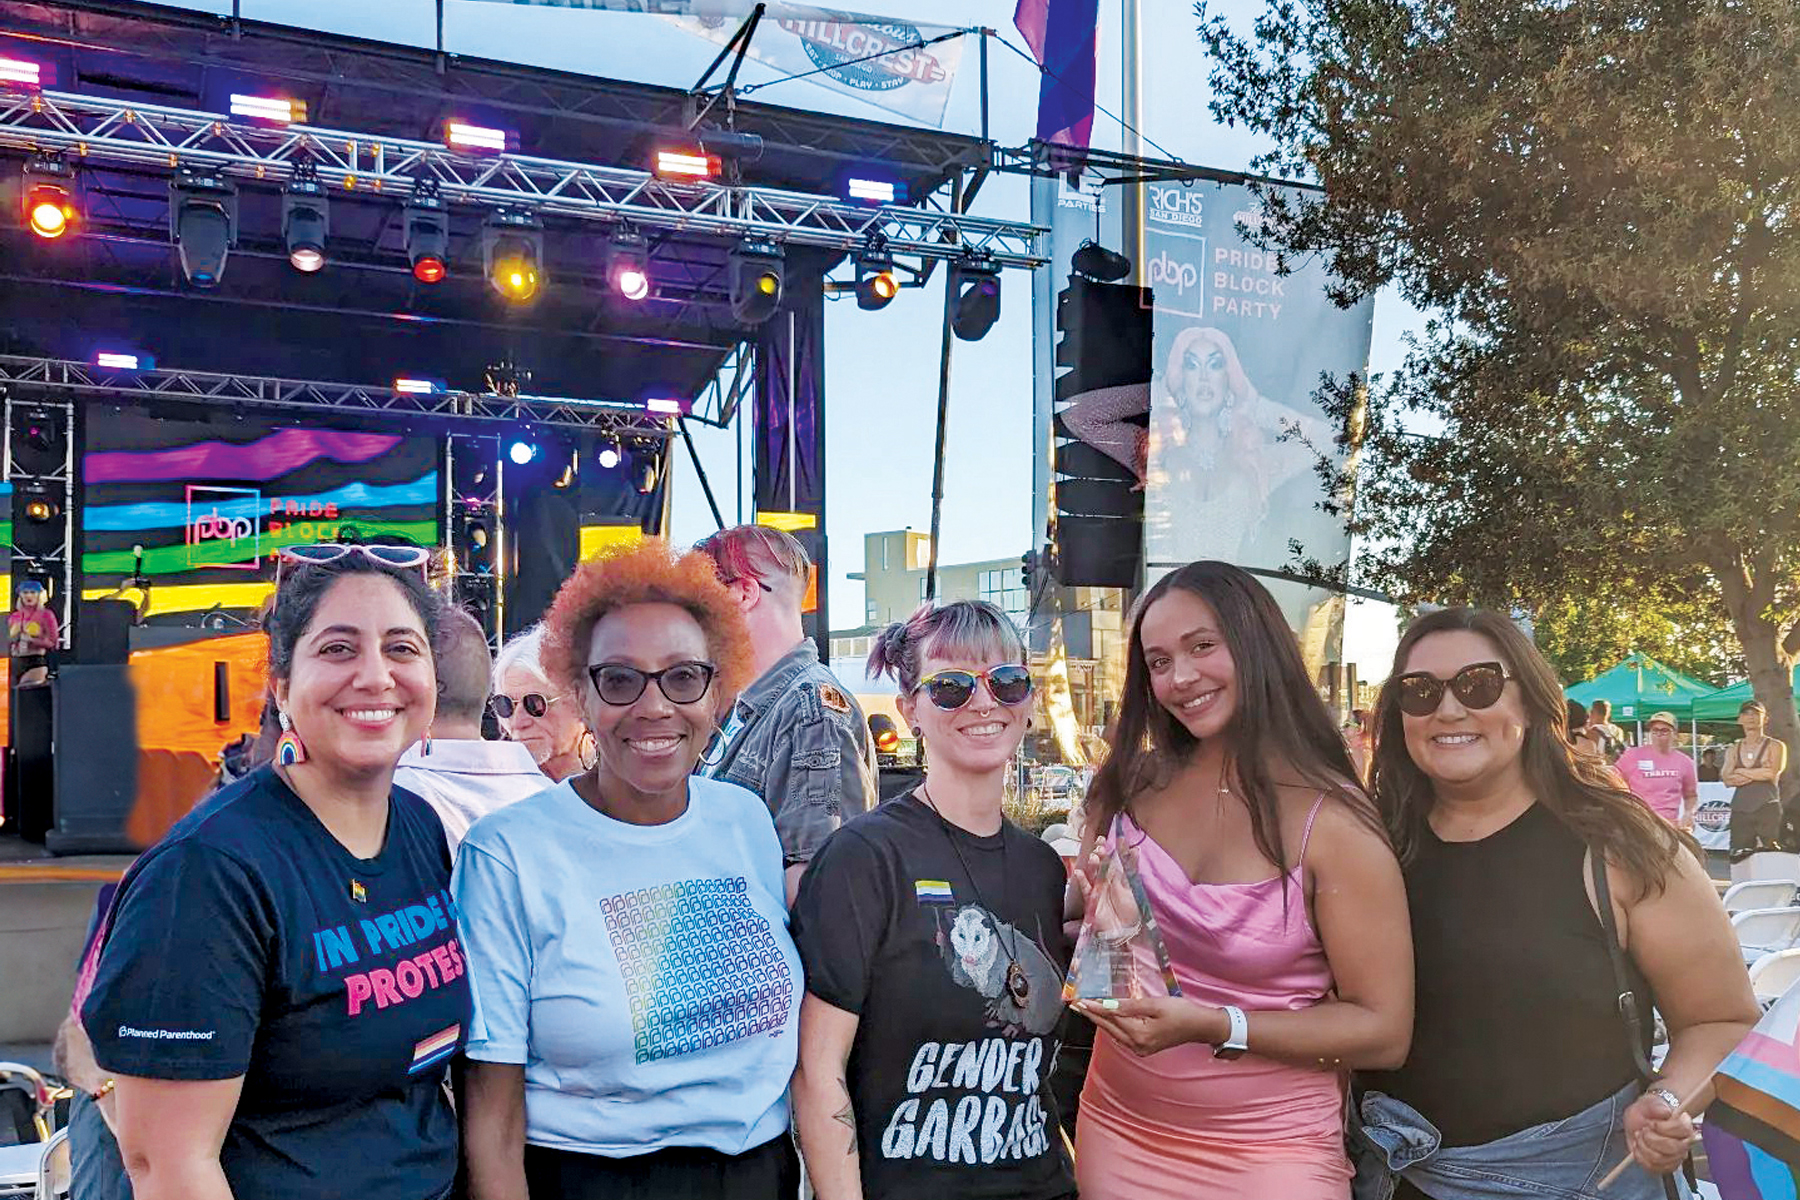 PPPSW award at San Diego Pride